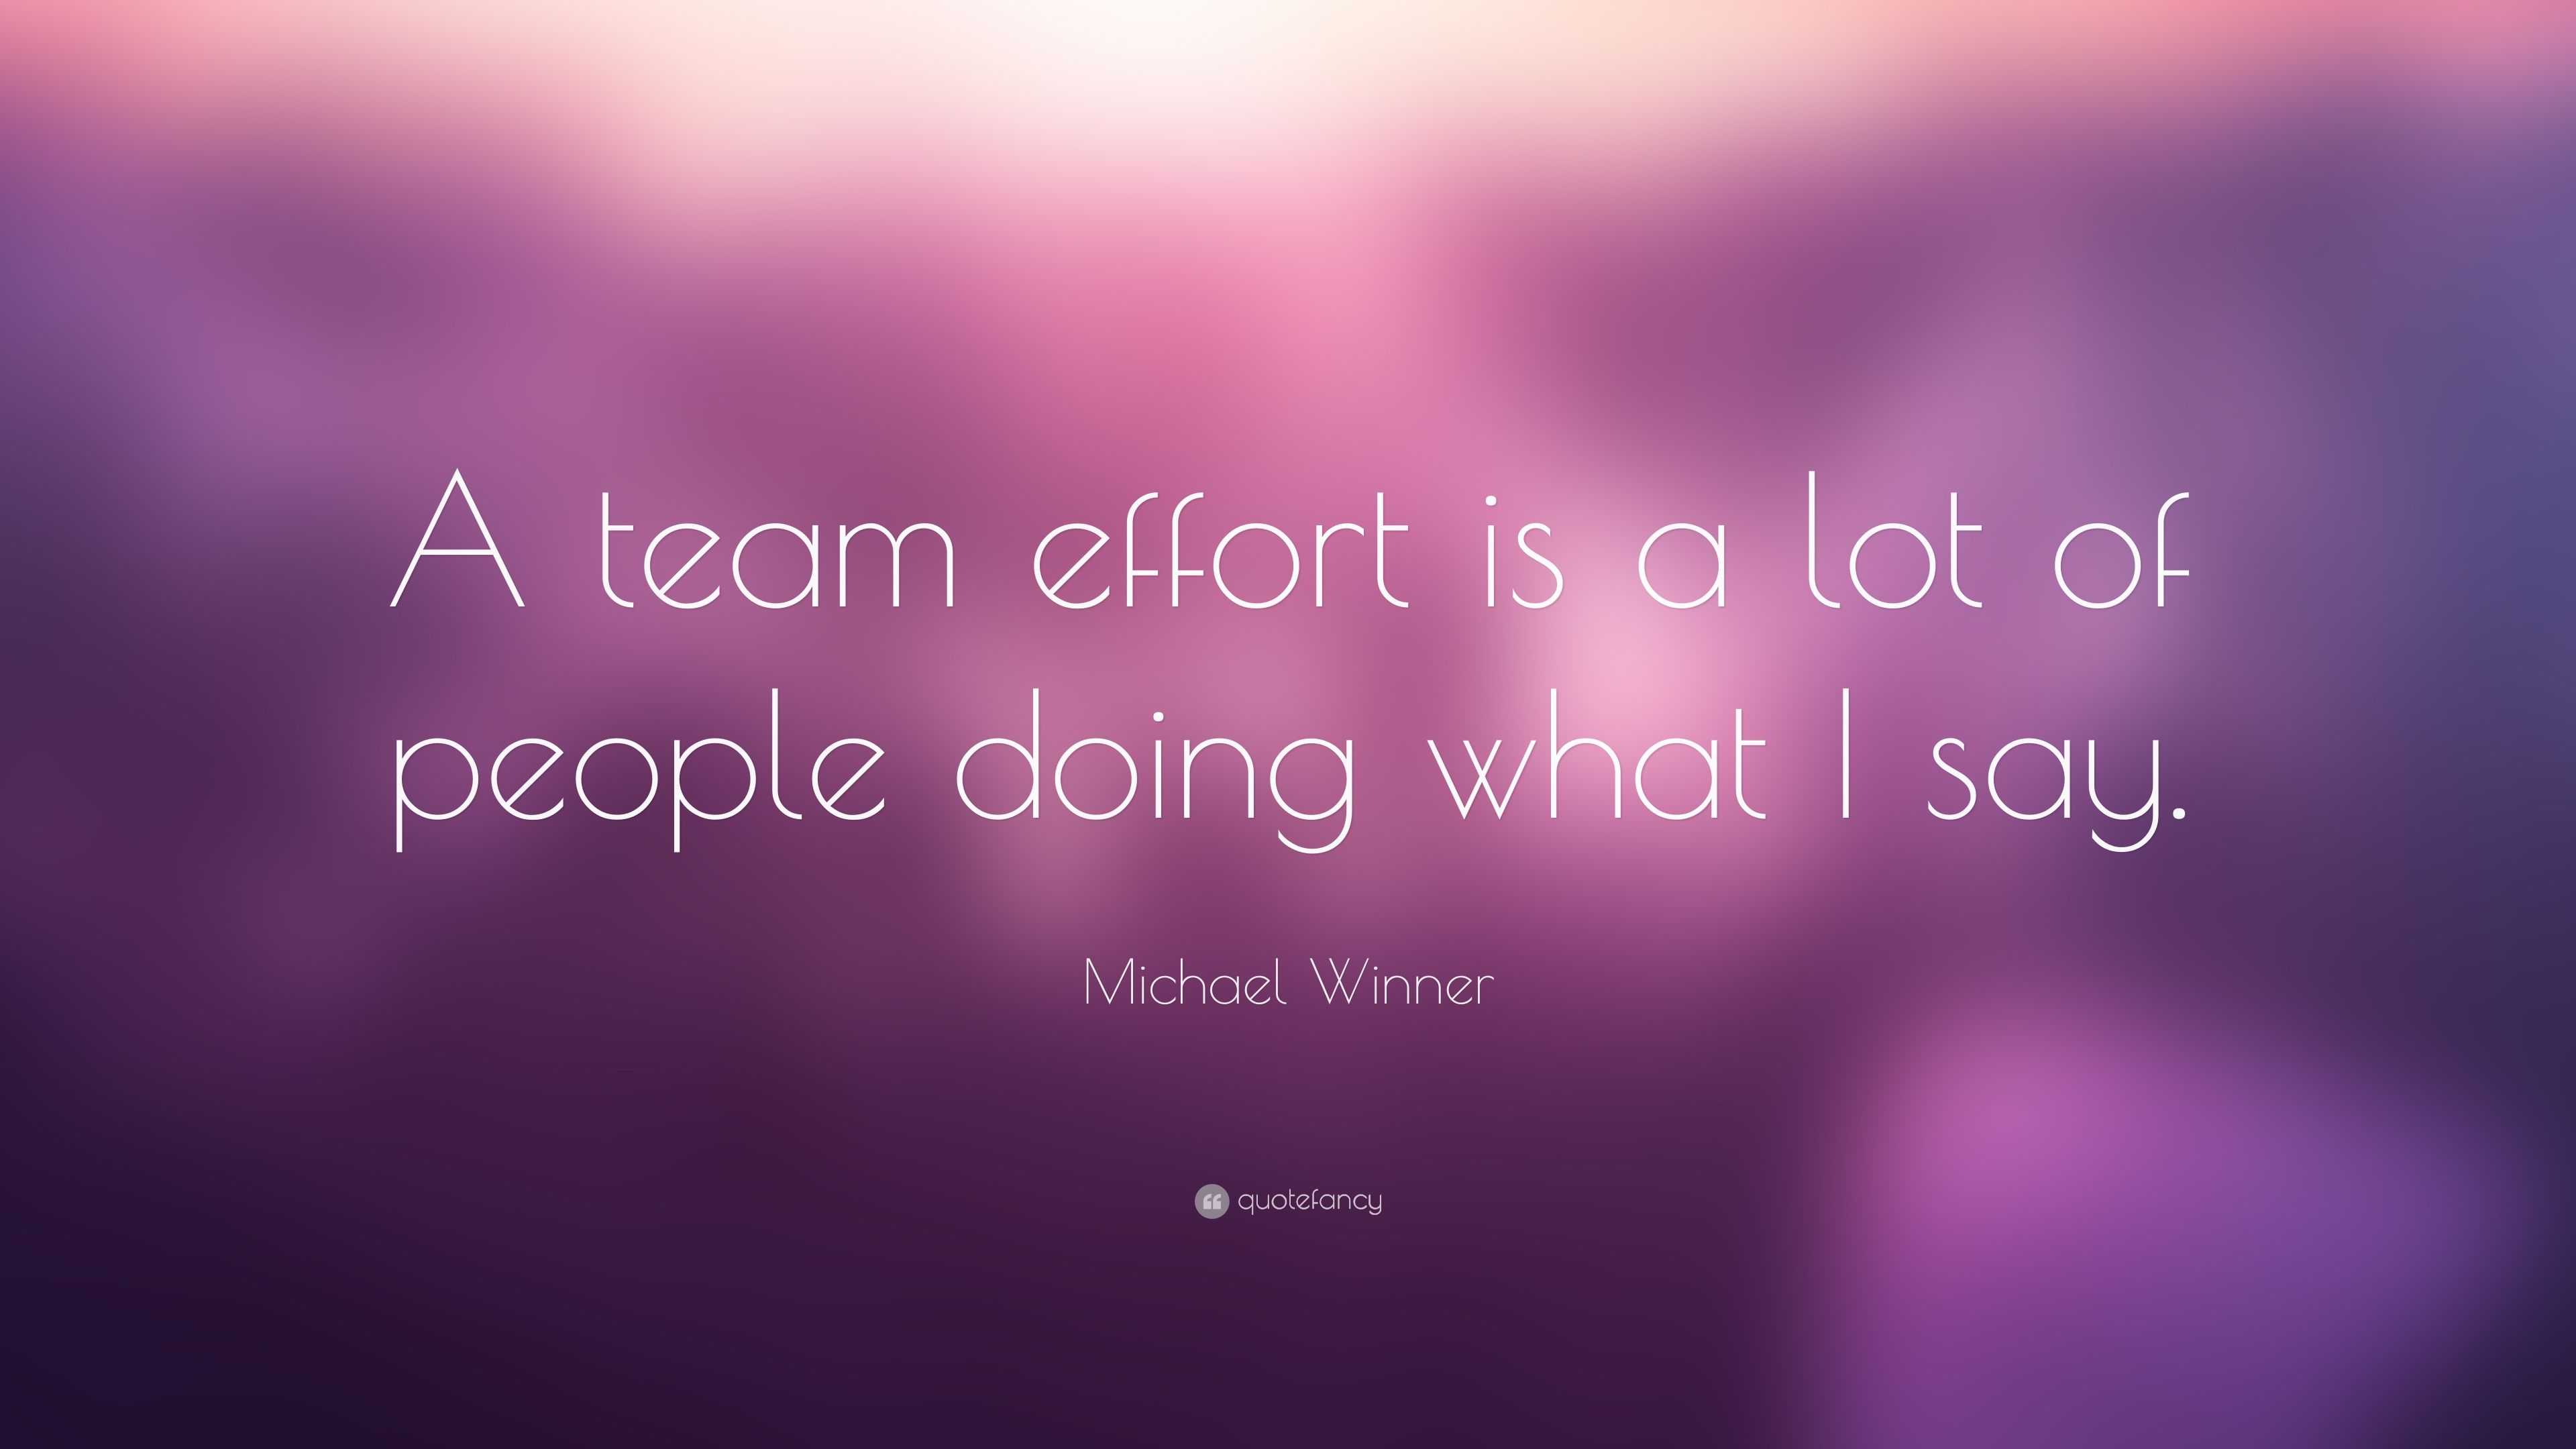 Michael Winner Quote: “A team effort is a lot of people doing what I say.”